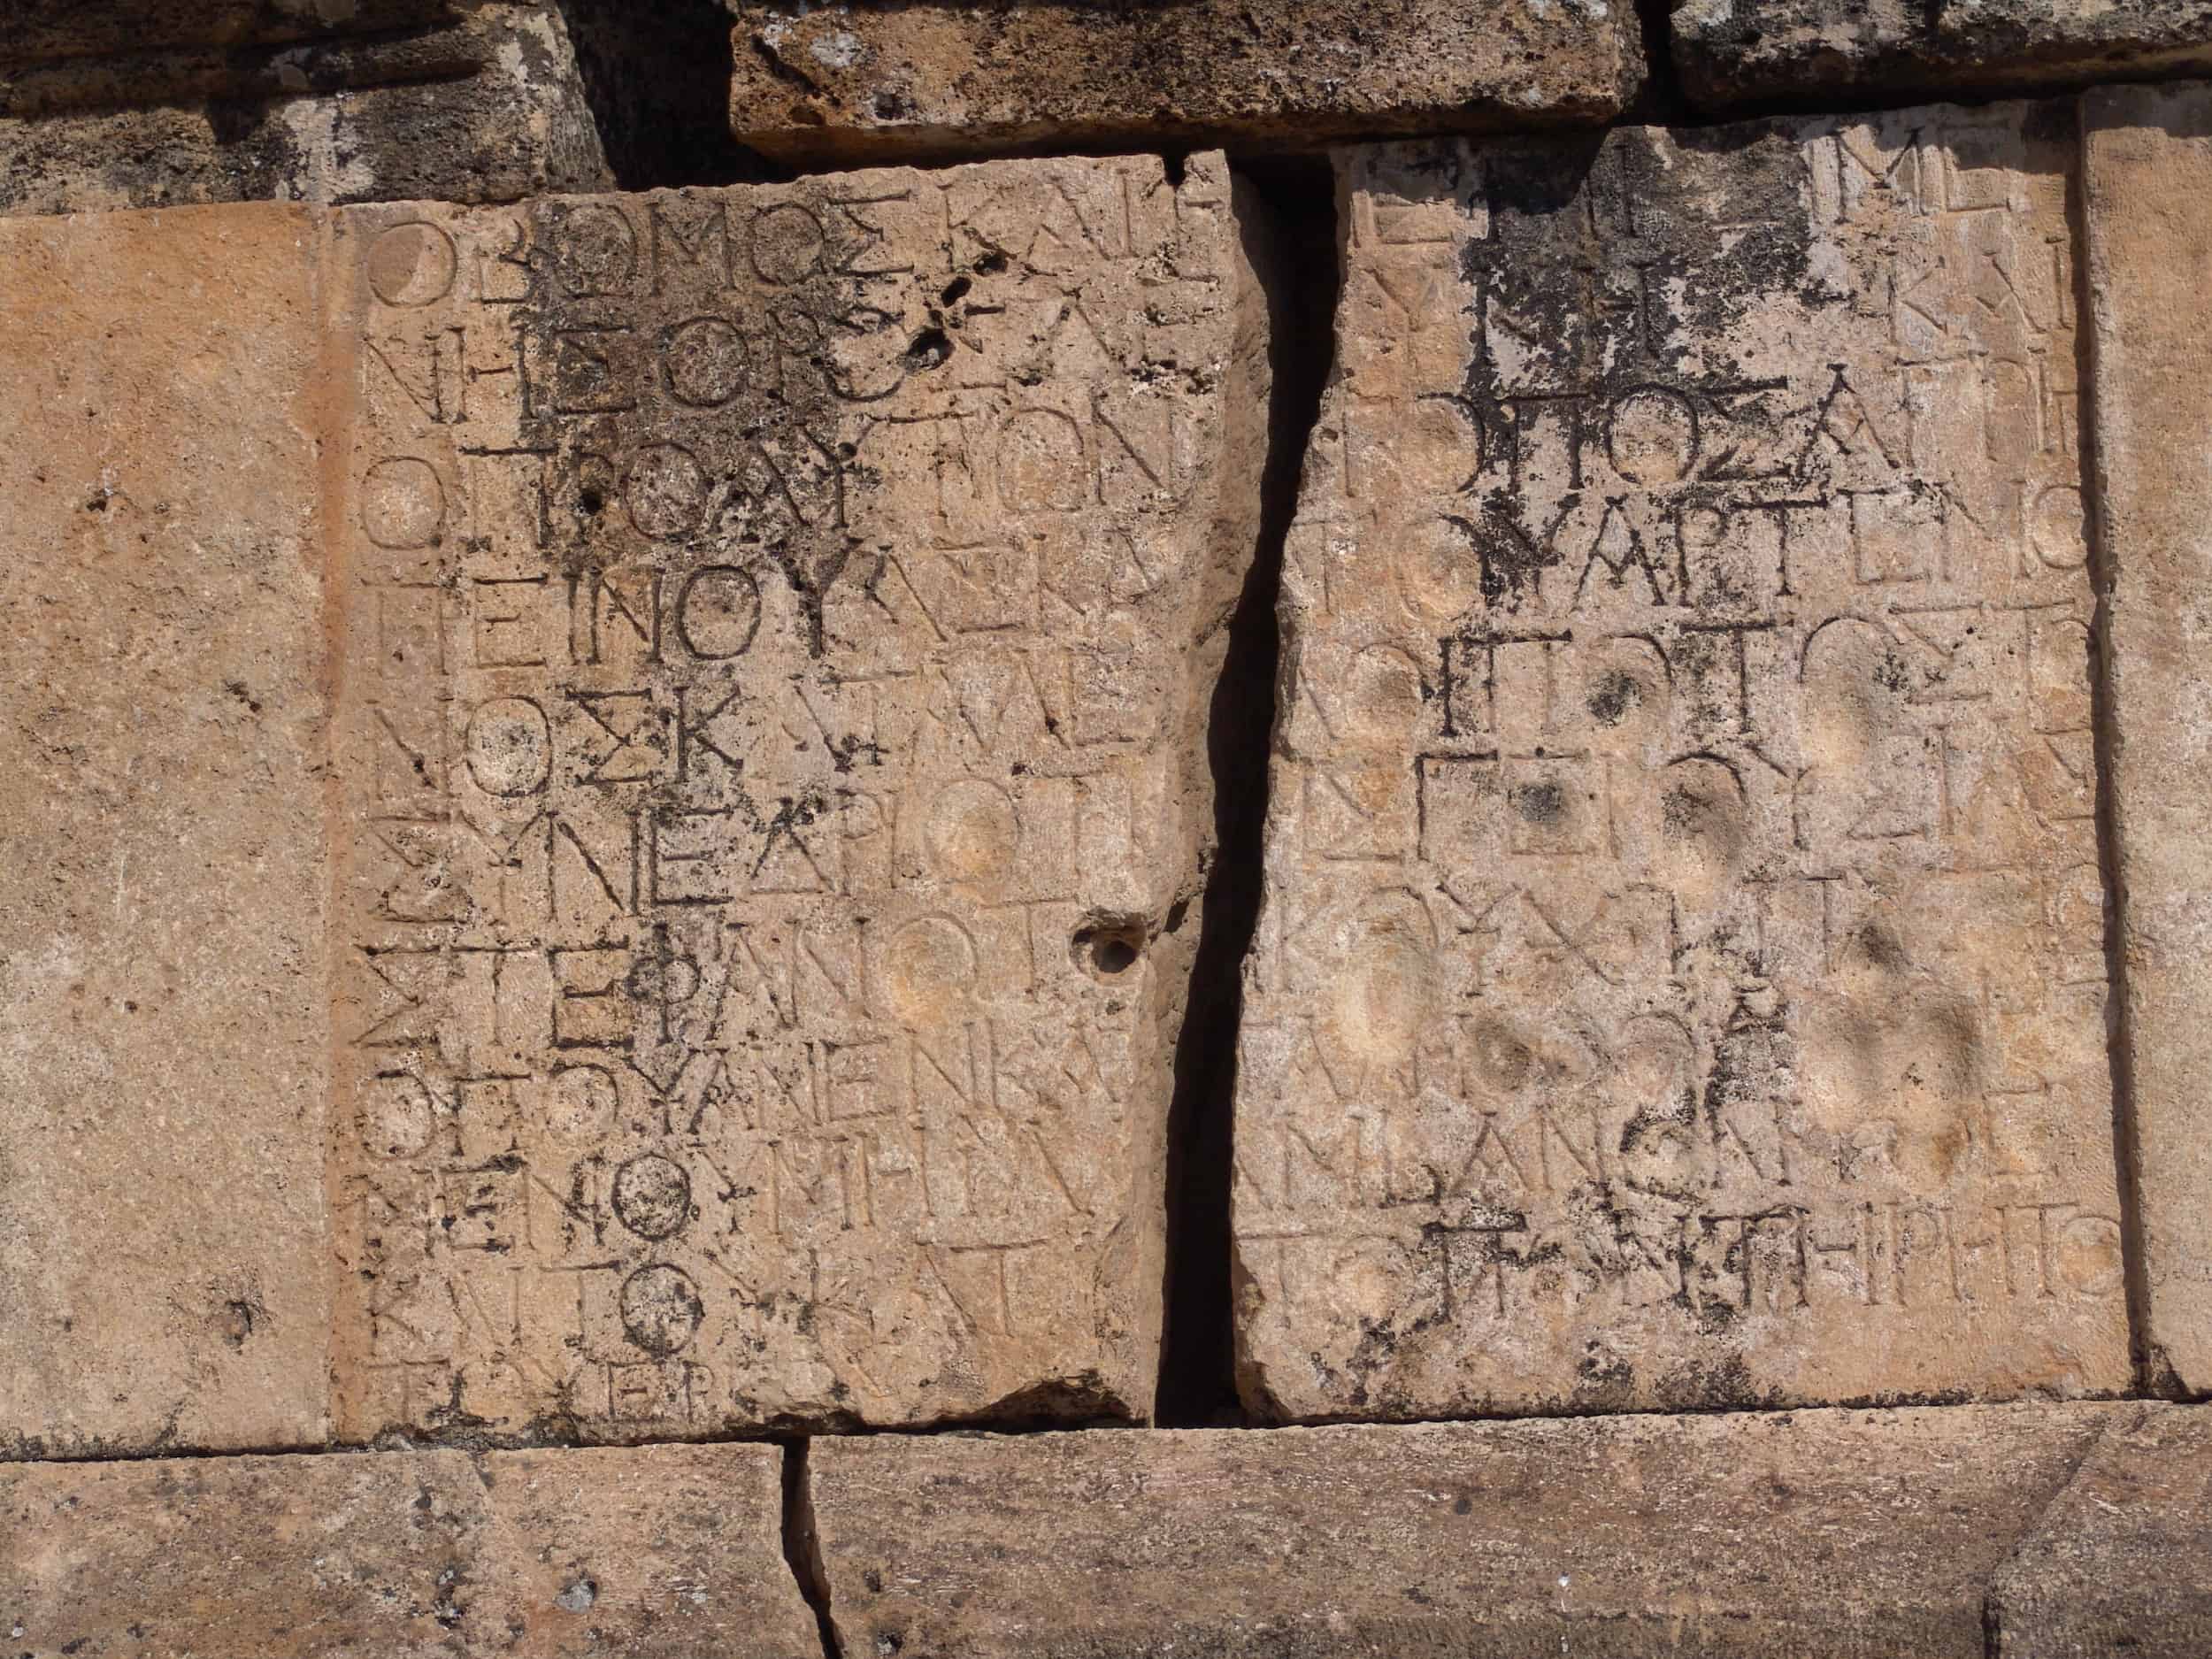 Greek inscription on the tomb in the eastern necropolis of Hierapolis